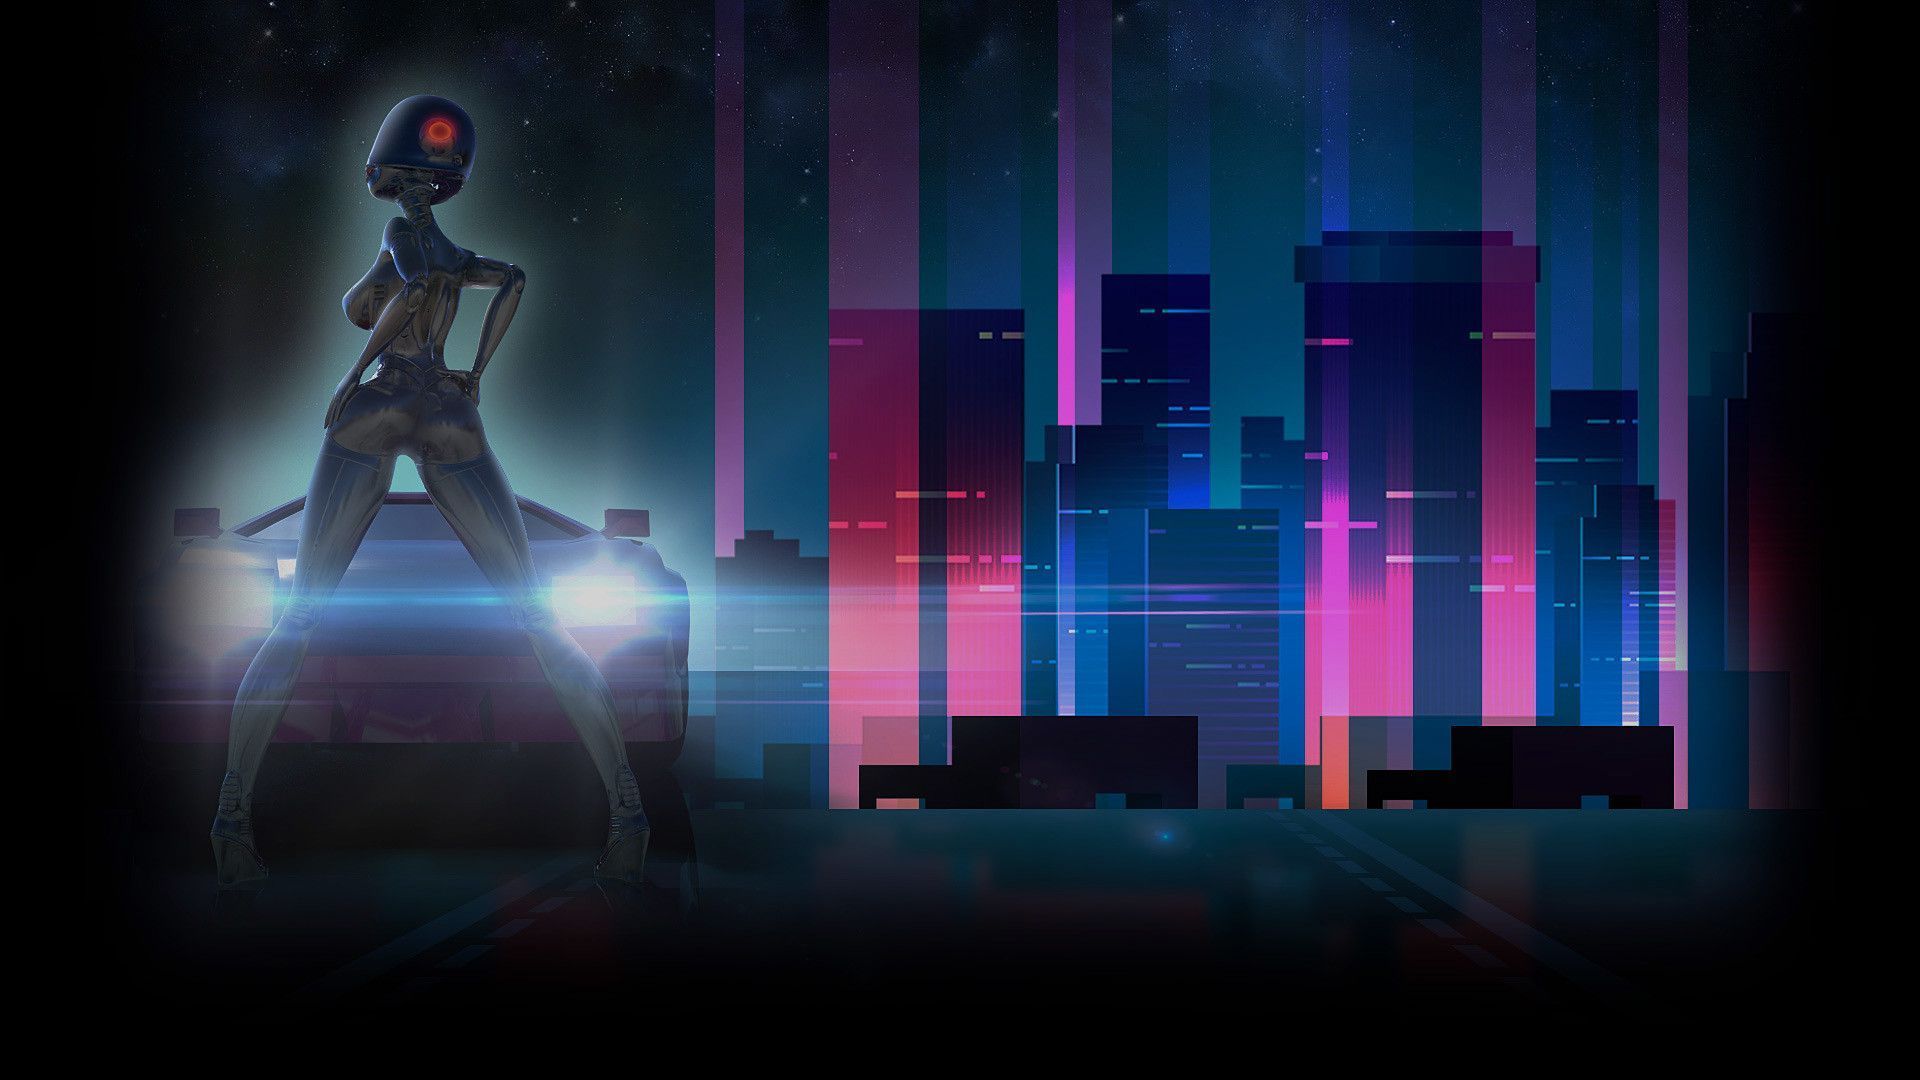 A robot with a red eye standing on a car in a cyberpunk city - 1920x1080, dark vaporwave